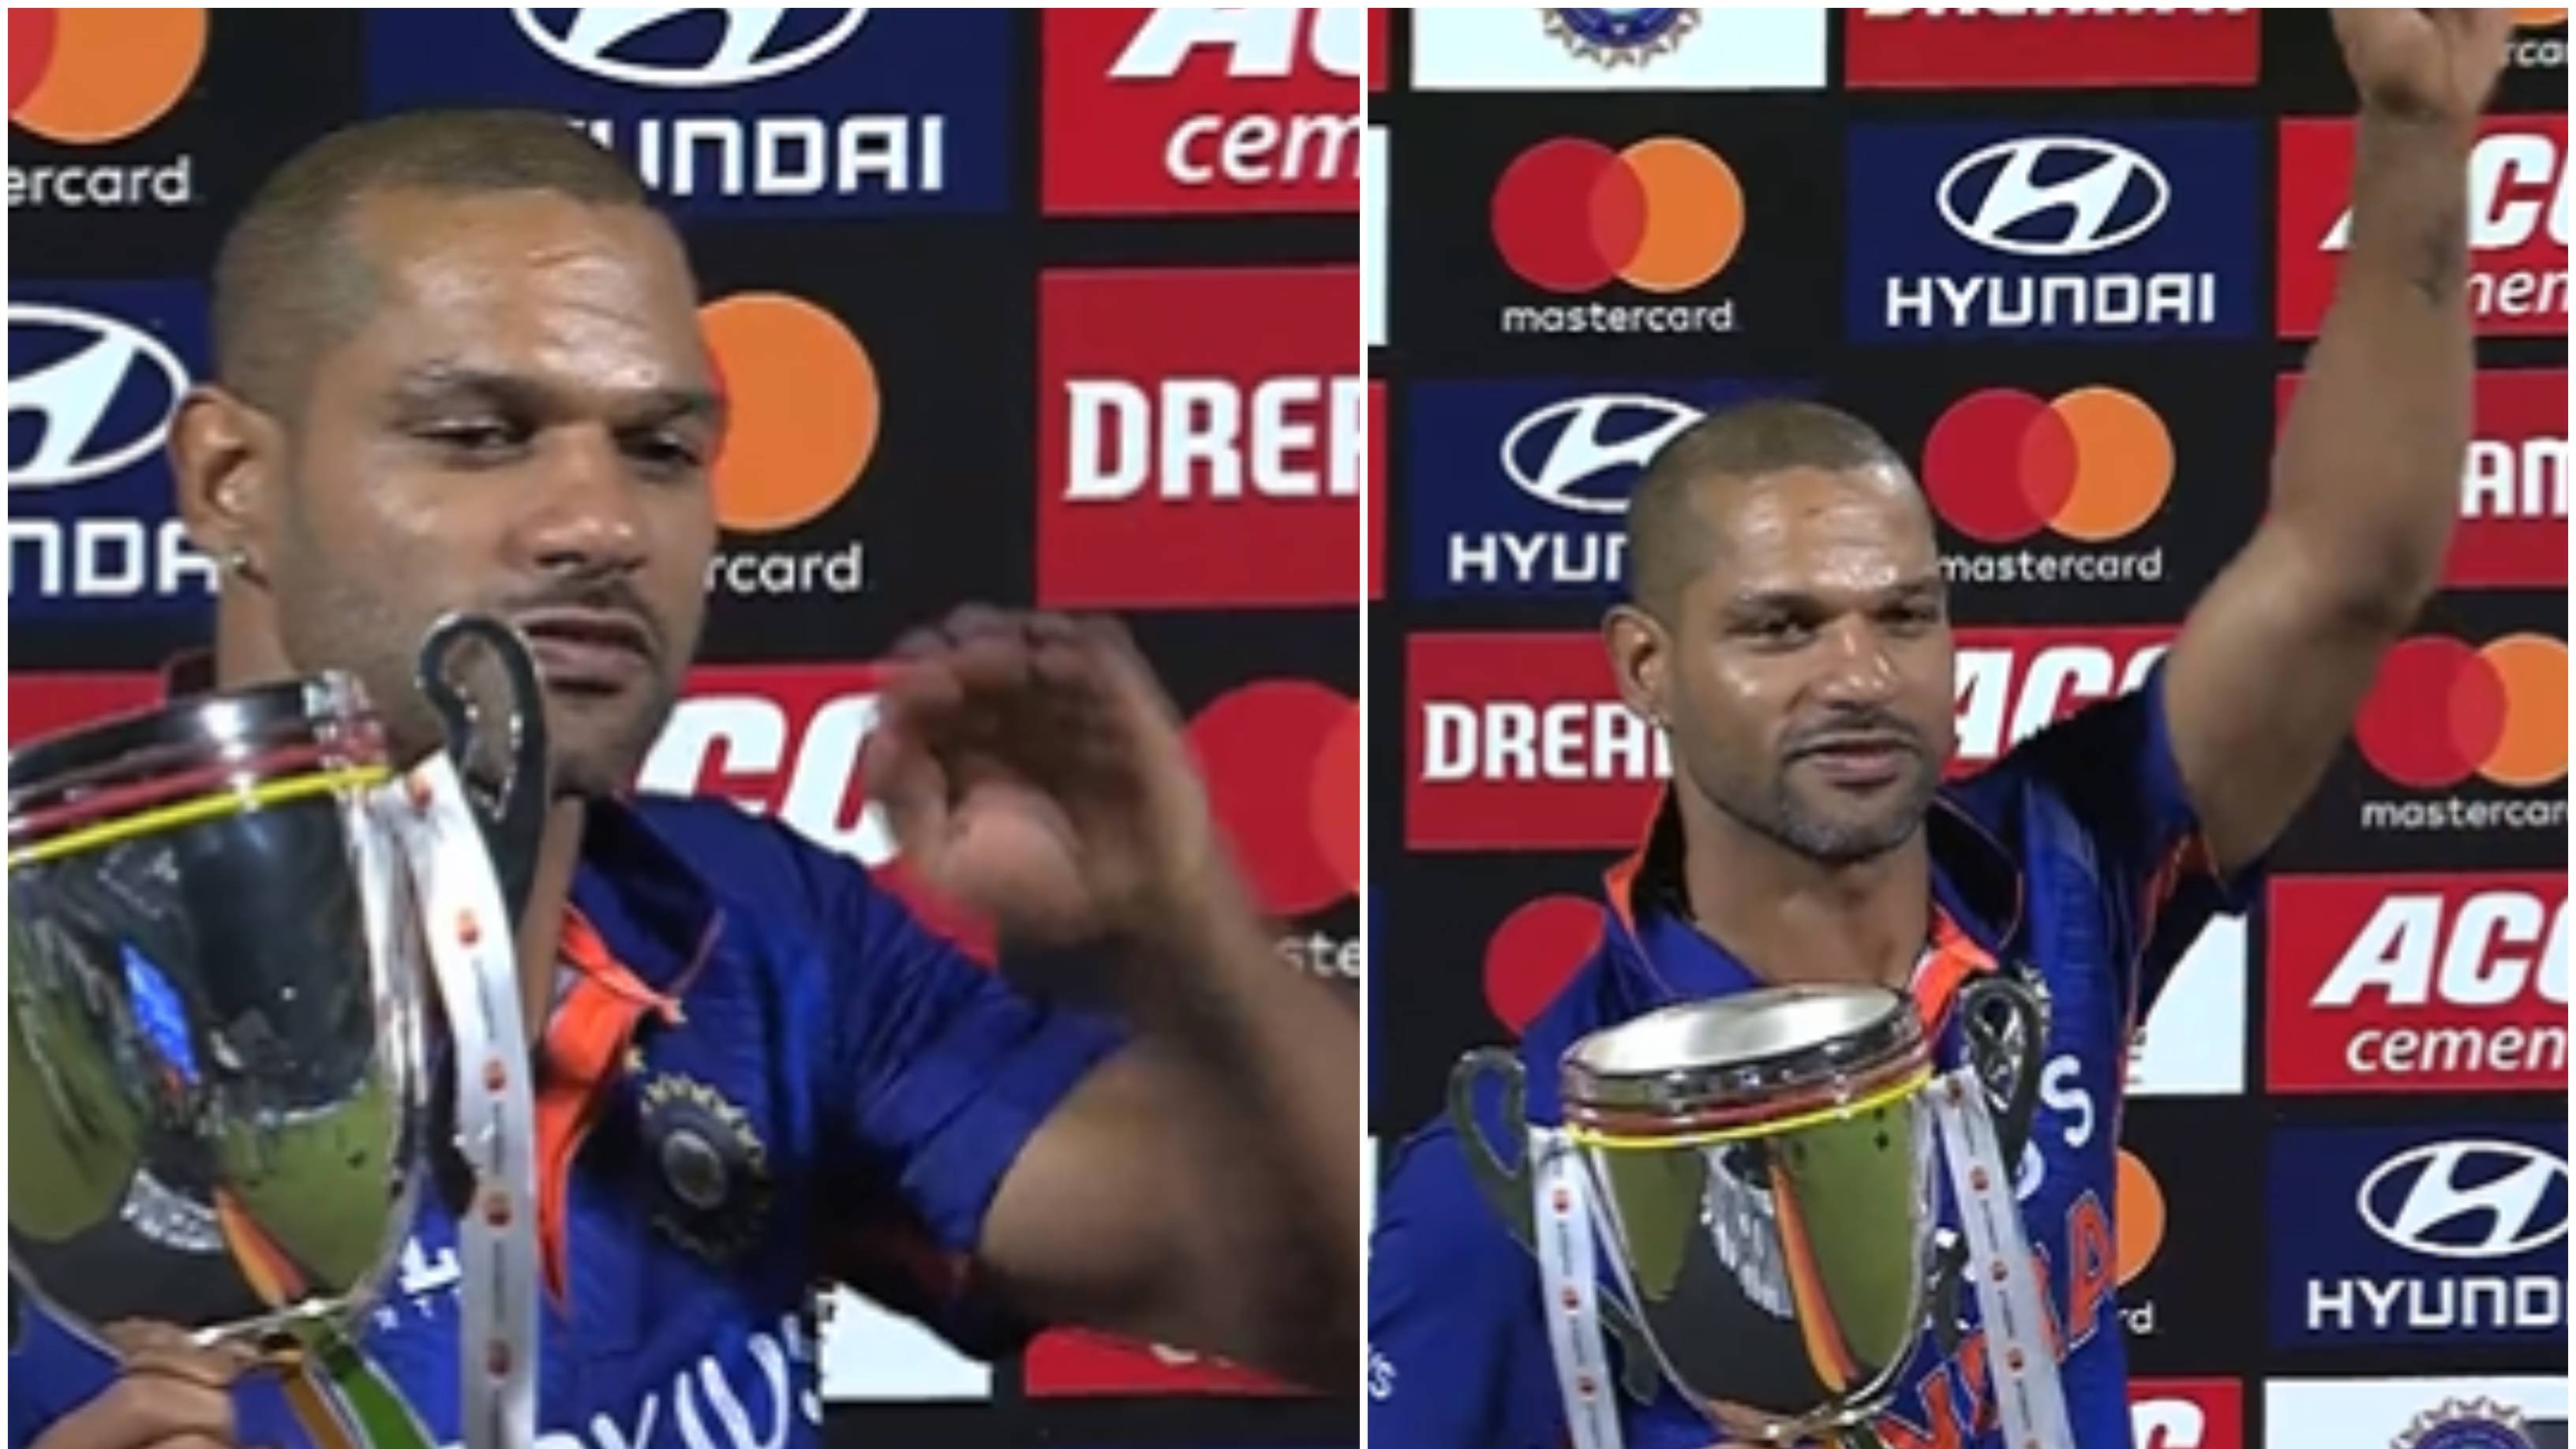 IND v SA 2022: WATCH – Shikhar Dhawan performs his trademark thigh-five celebration after receiving ODI trophy